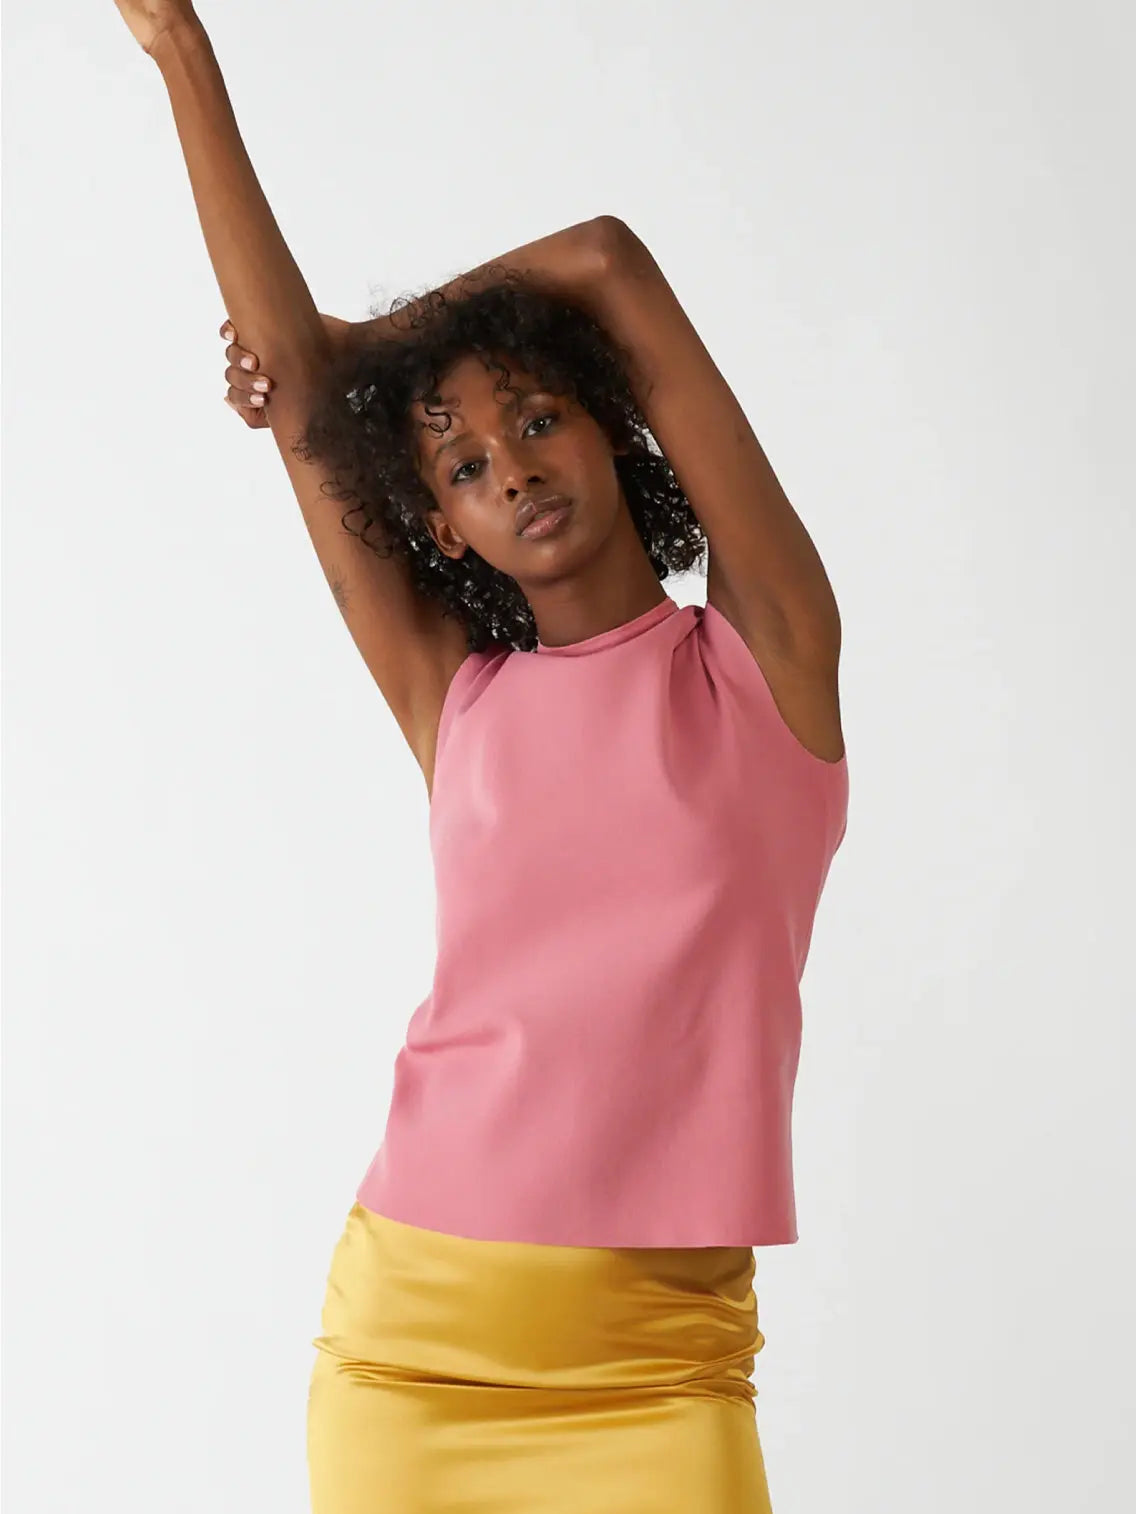 A Bielo Neru Top Pink with a high neckline and a back zipper closure. The lightweight, slightly textured fabric is perfect for warm days. Laid flat against a white background, this chic piece is available at BassalStore in Barcelona.